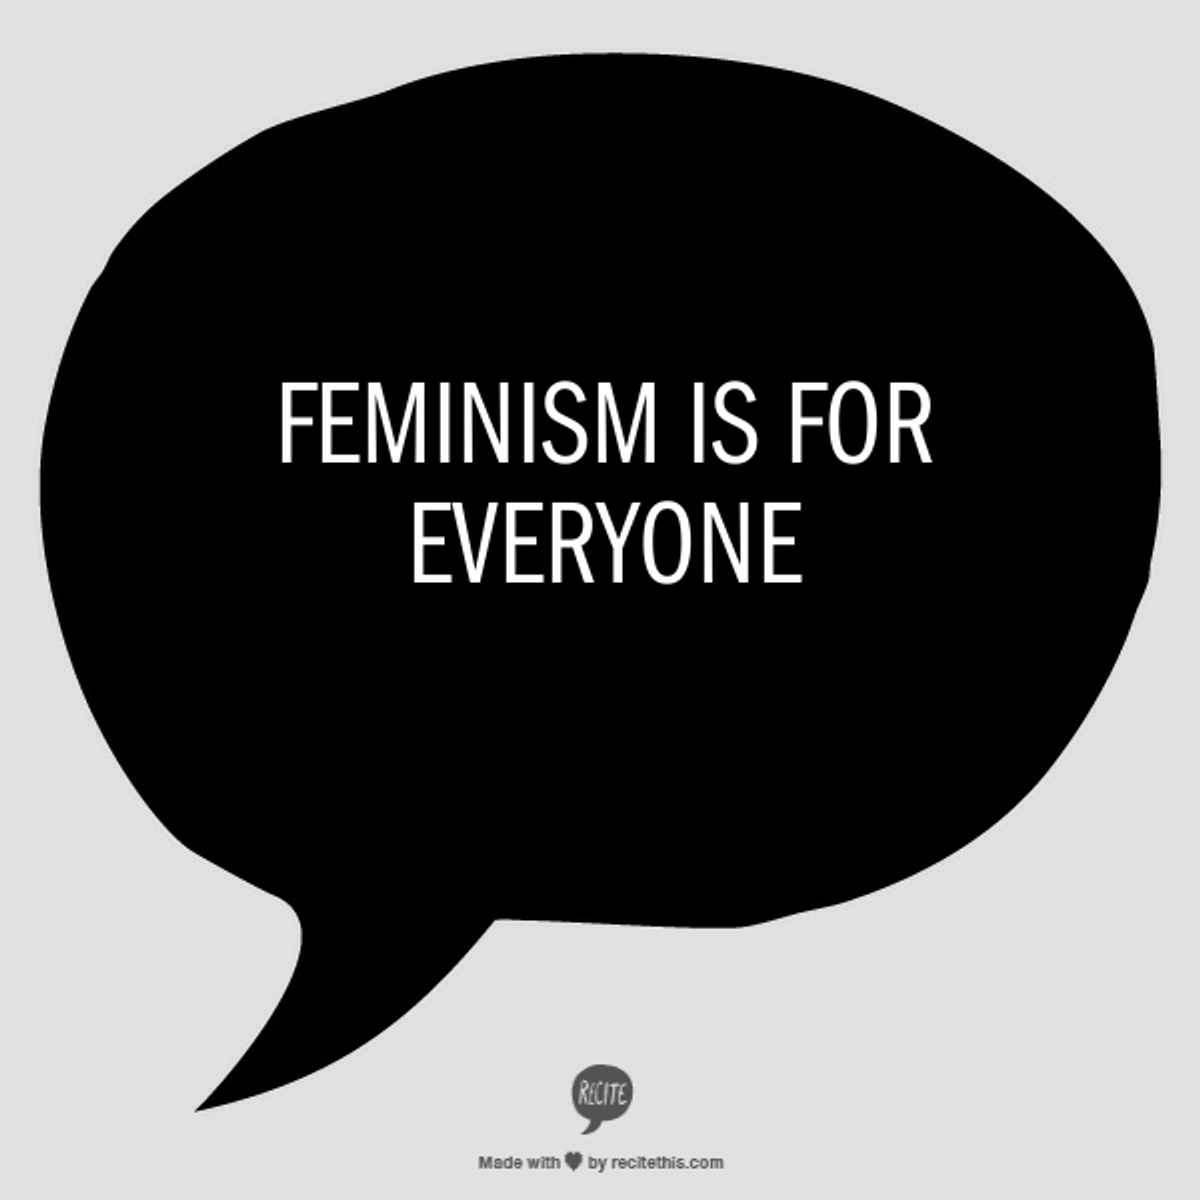 What The Word "Feminism" Actually Means